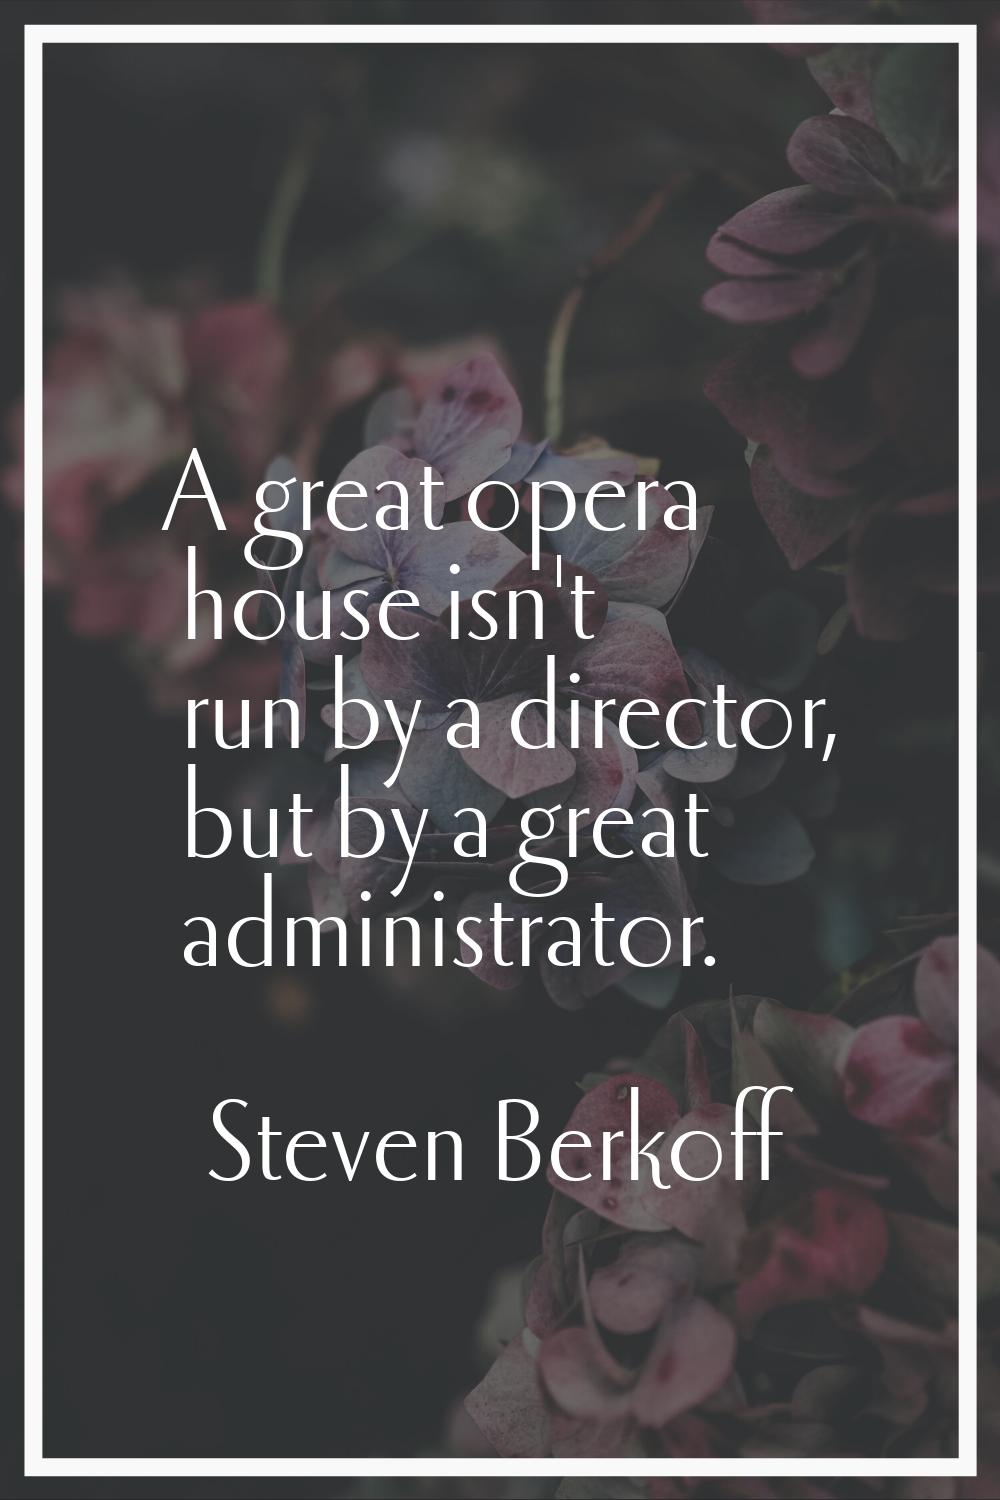 A great opera house isn't run by a director, but by a great administrator.